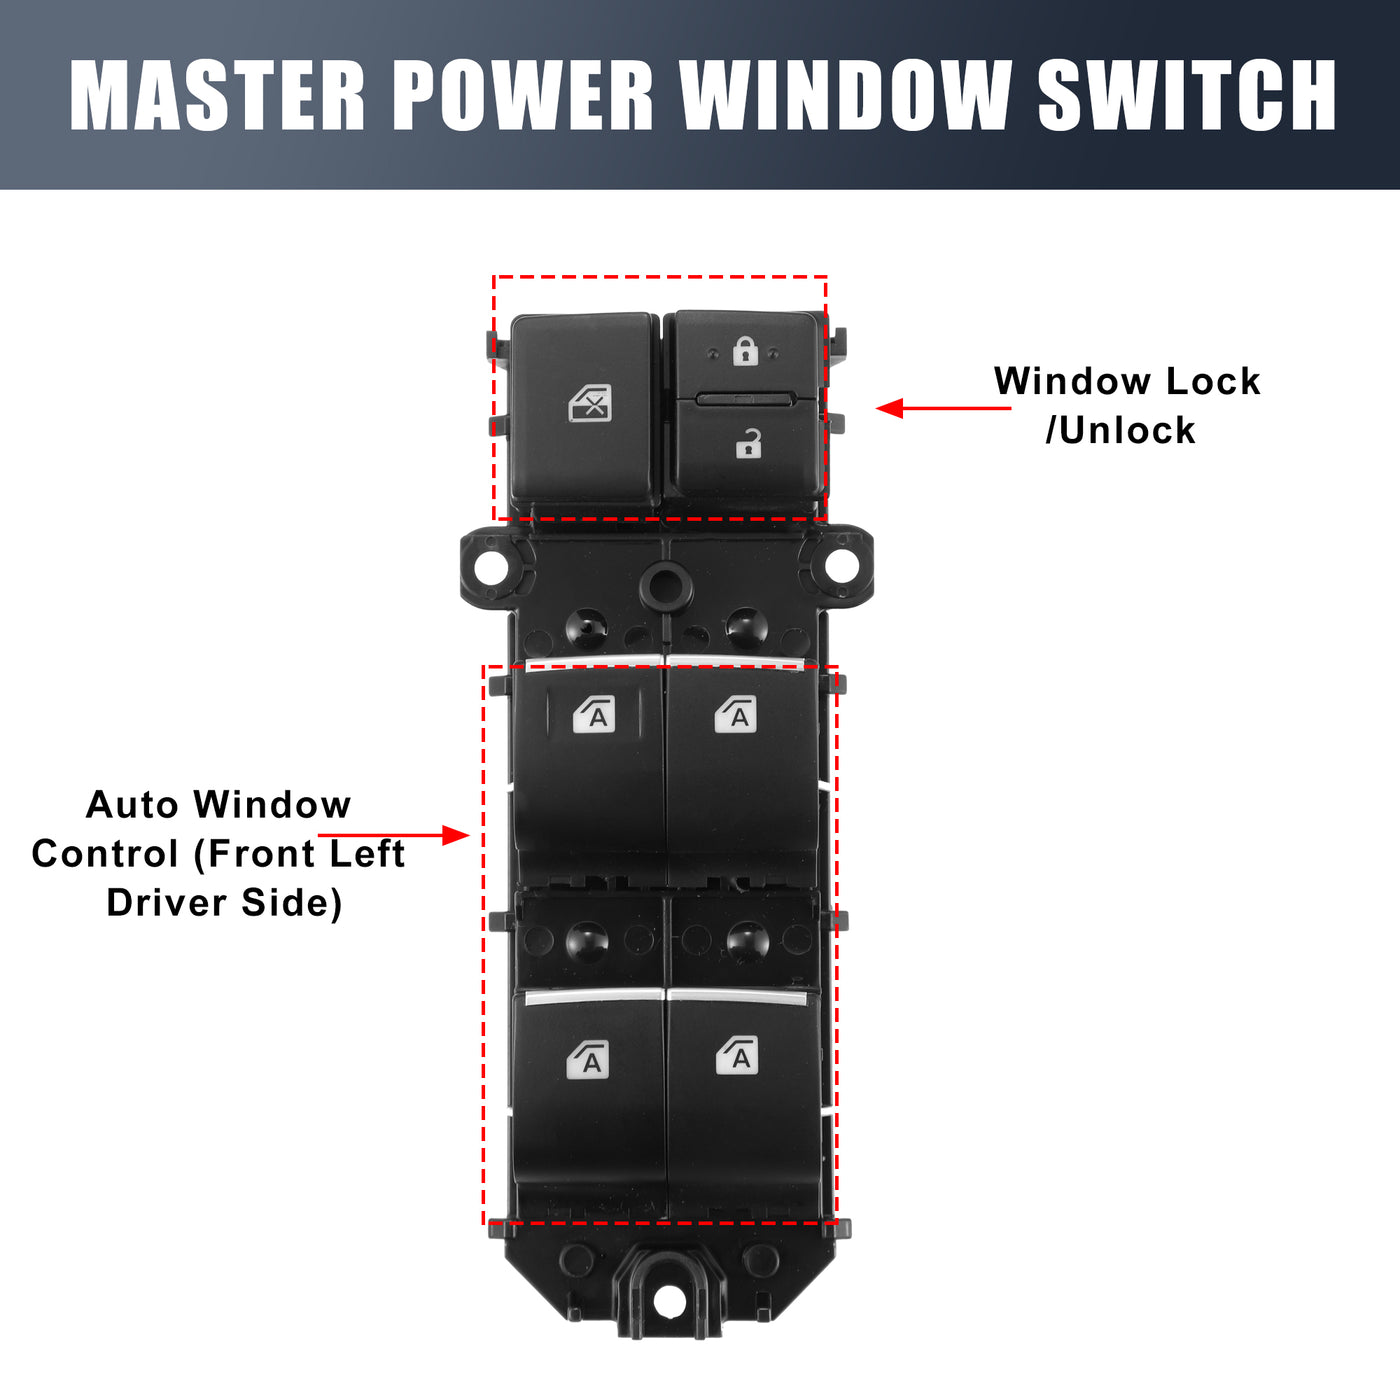 X AUTOHAUX 84040-06070 8404033170 Car Master Power Window Switch Front Driver Side for Toyota C-HR 2018-2019 for Toyota Camry 2018-2020